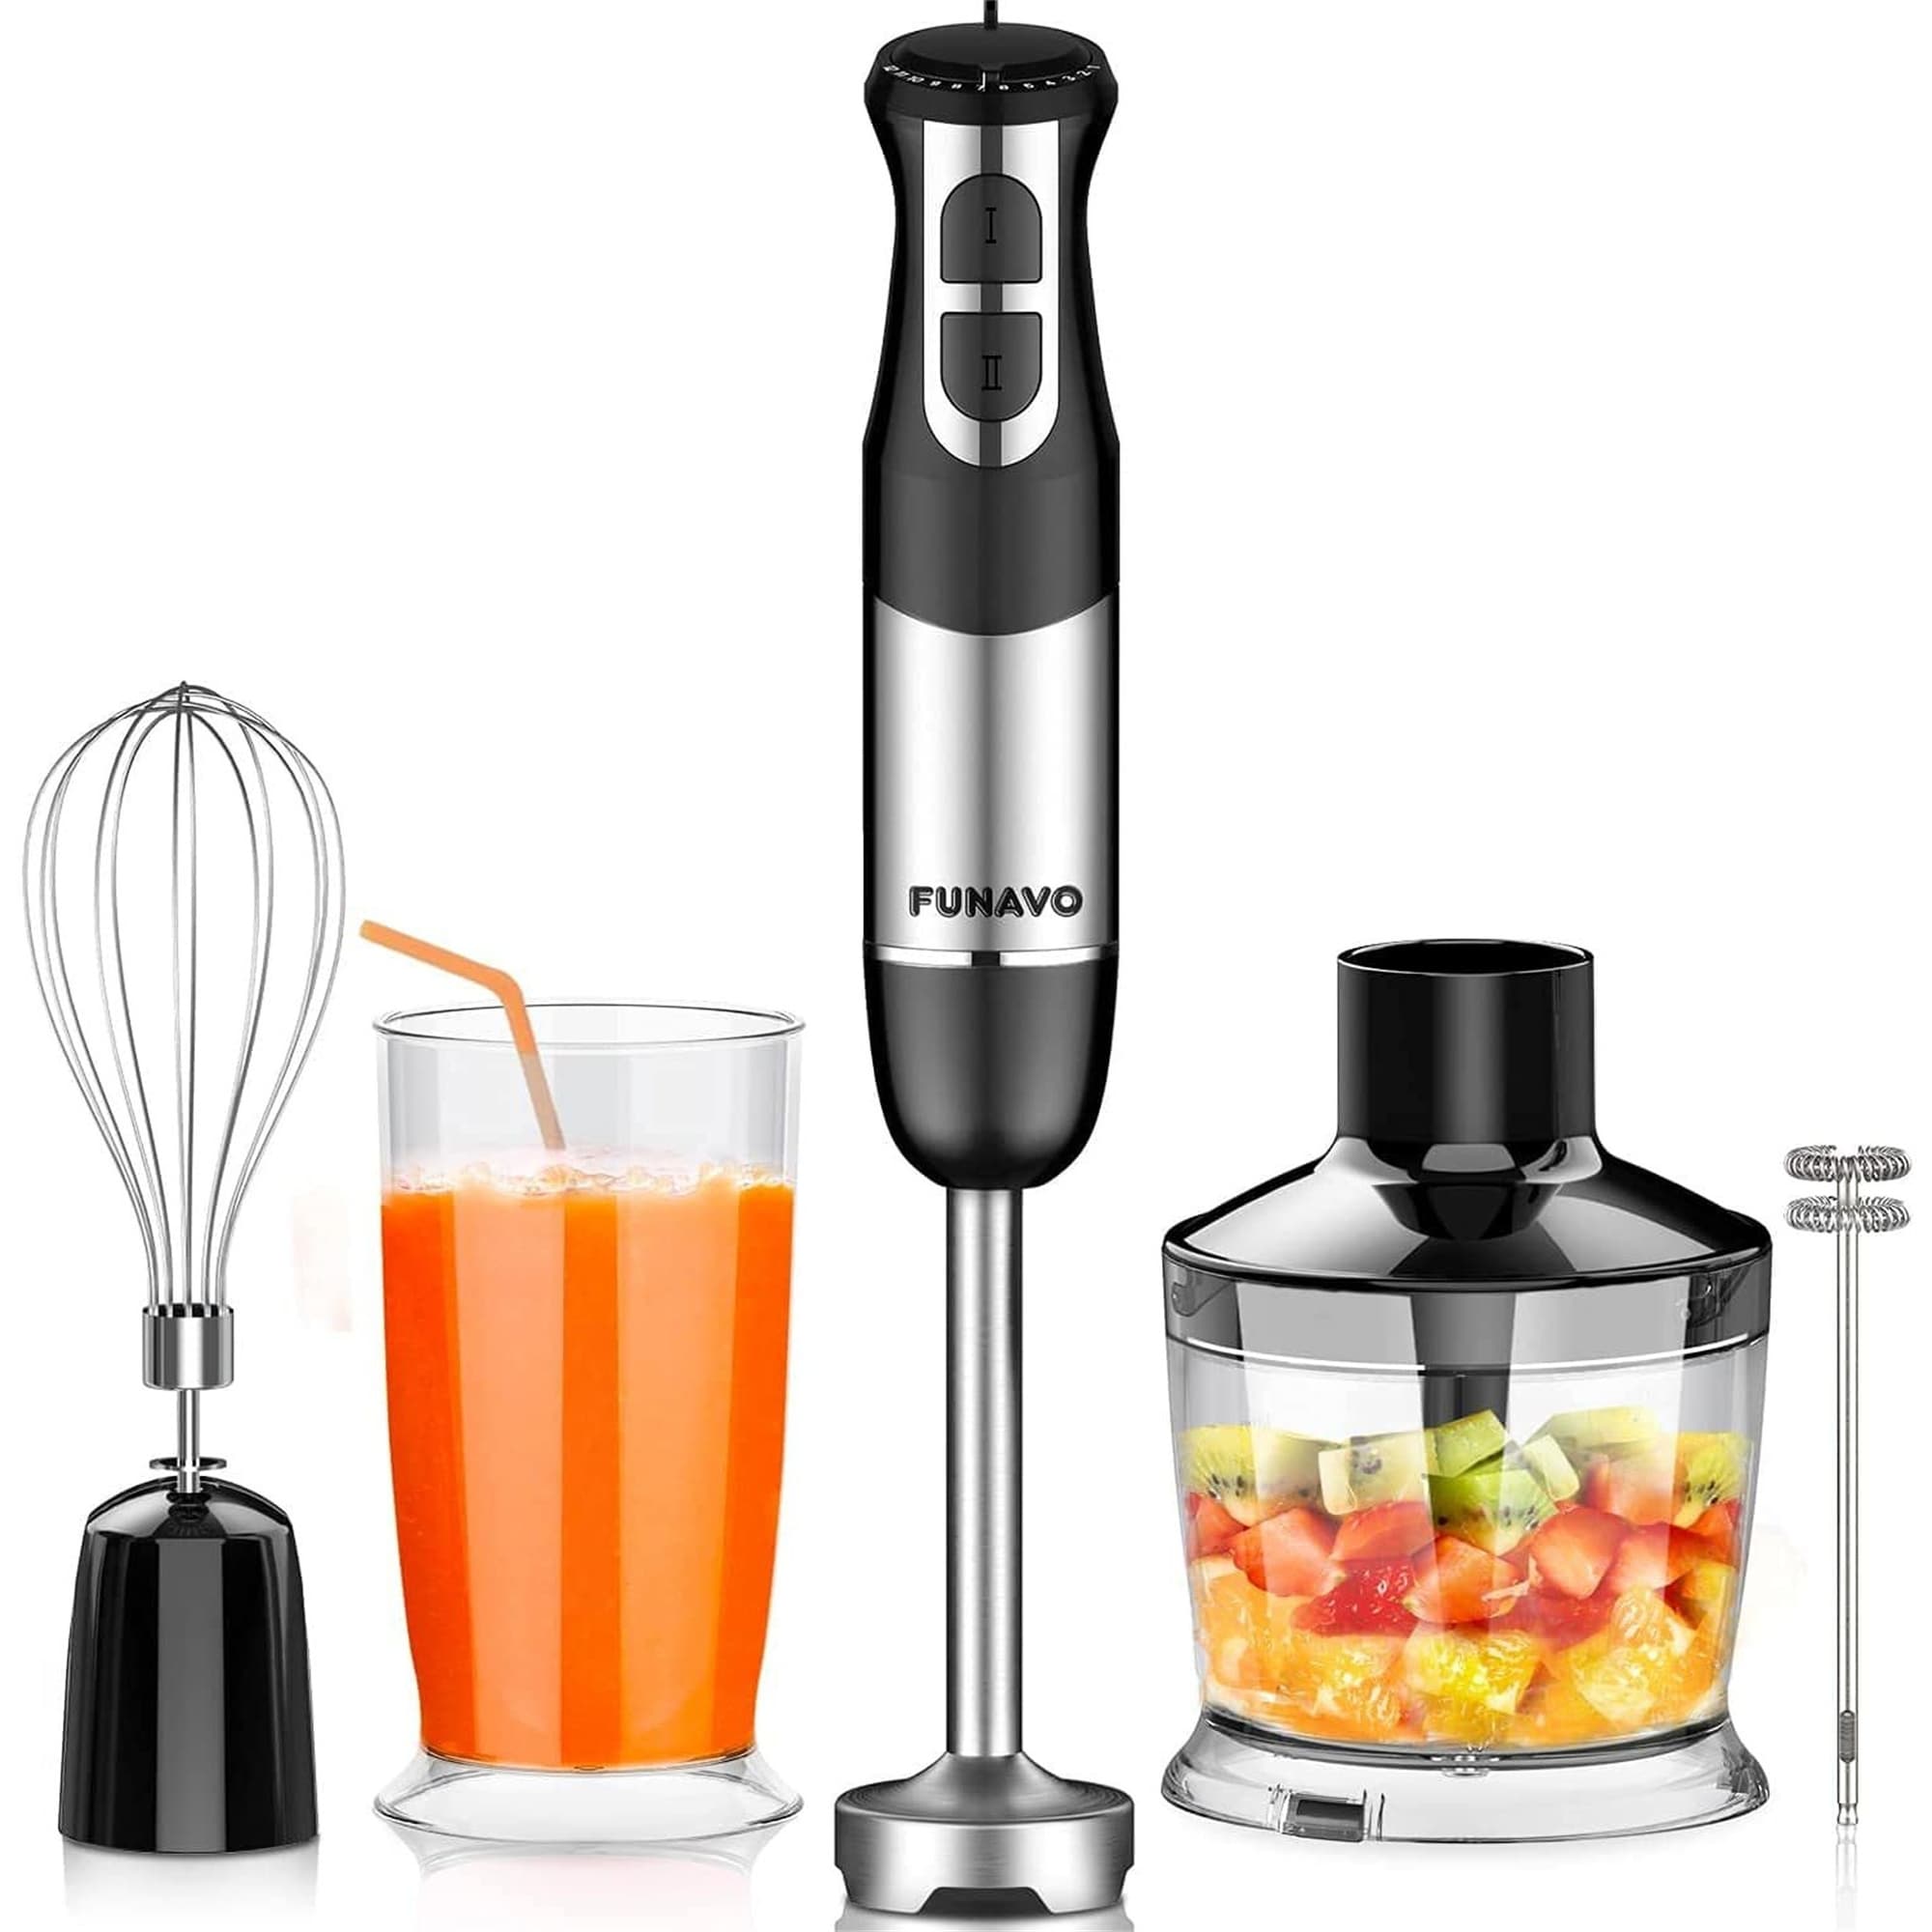 https://ak1.ostkcdn.com/images/products/is/images/direct/1325a3582e742b2f27105c36dca9d9ddf0926692/5-in-1-Hand-Blender%2C-12-Speed-Multi-function-Stick-Blender-for-Home.jpg